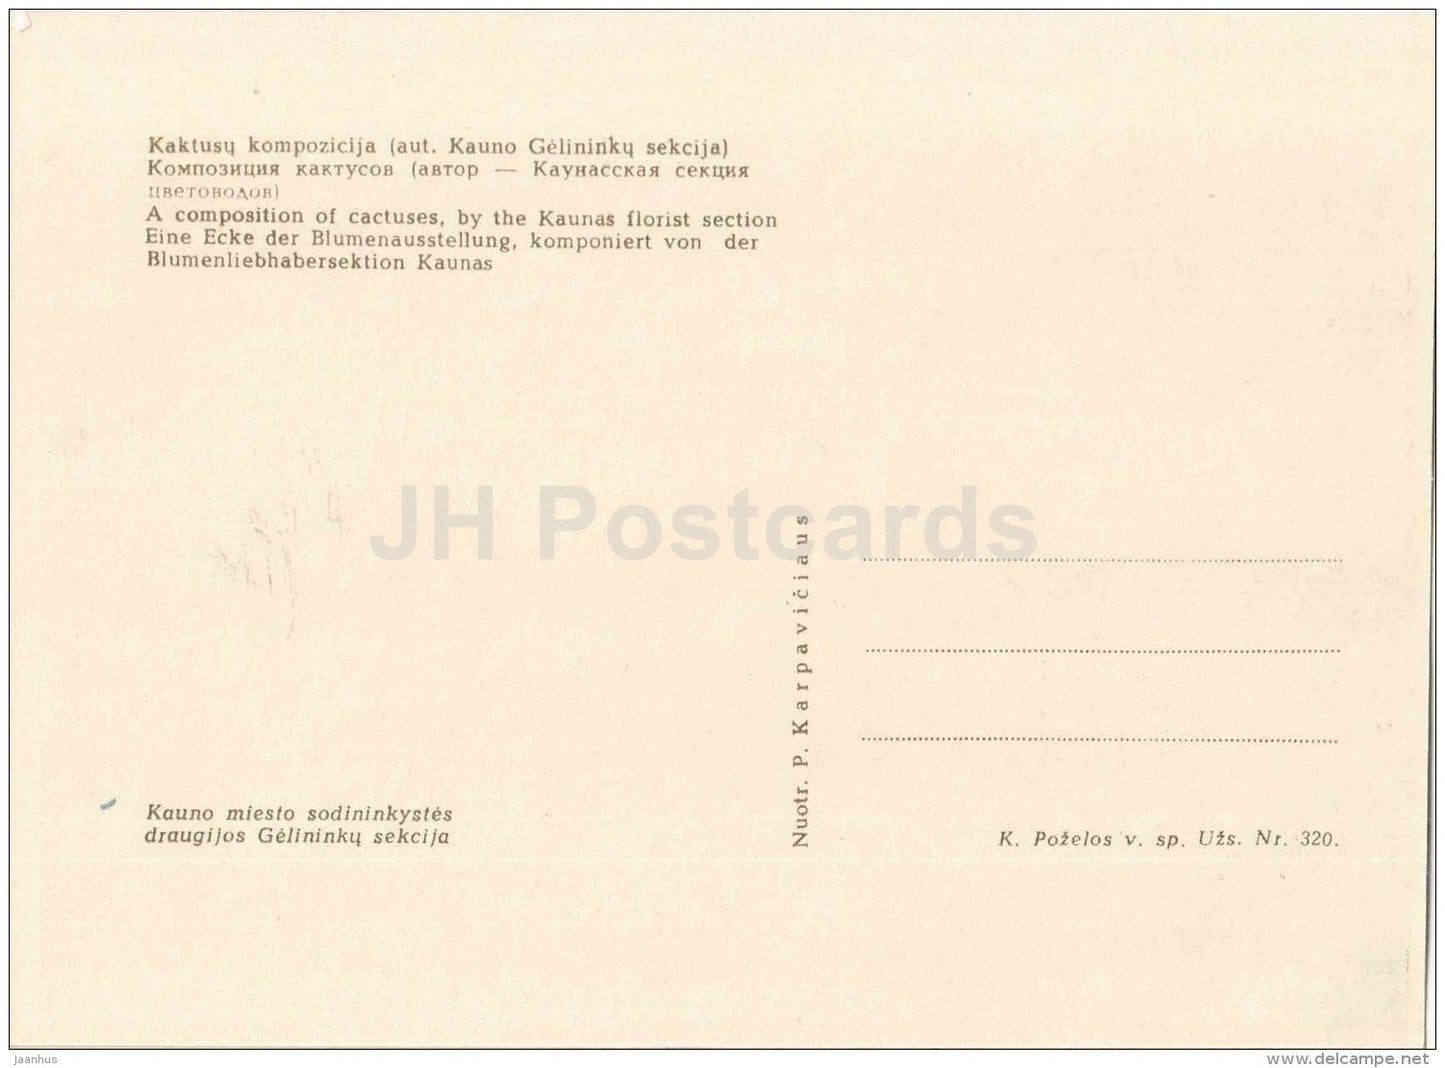 a Composition of Cactuses by the Kaunas Florist Section - 1963 - Lithuania USSR - unused - JH Postcards